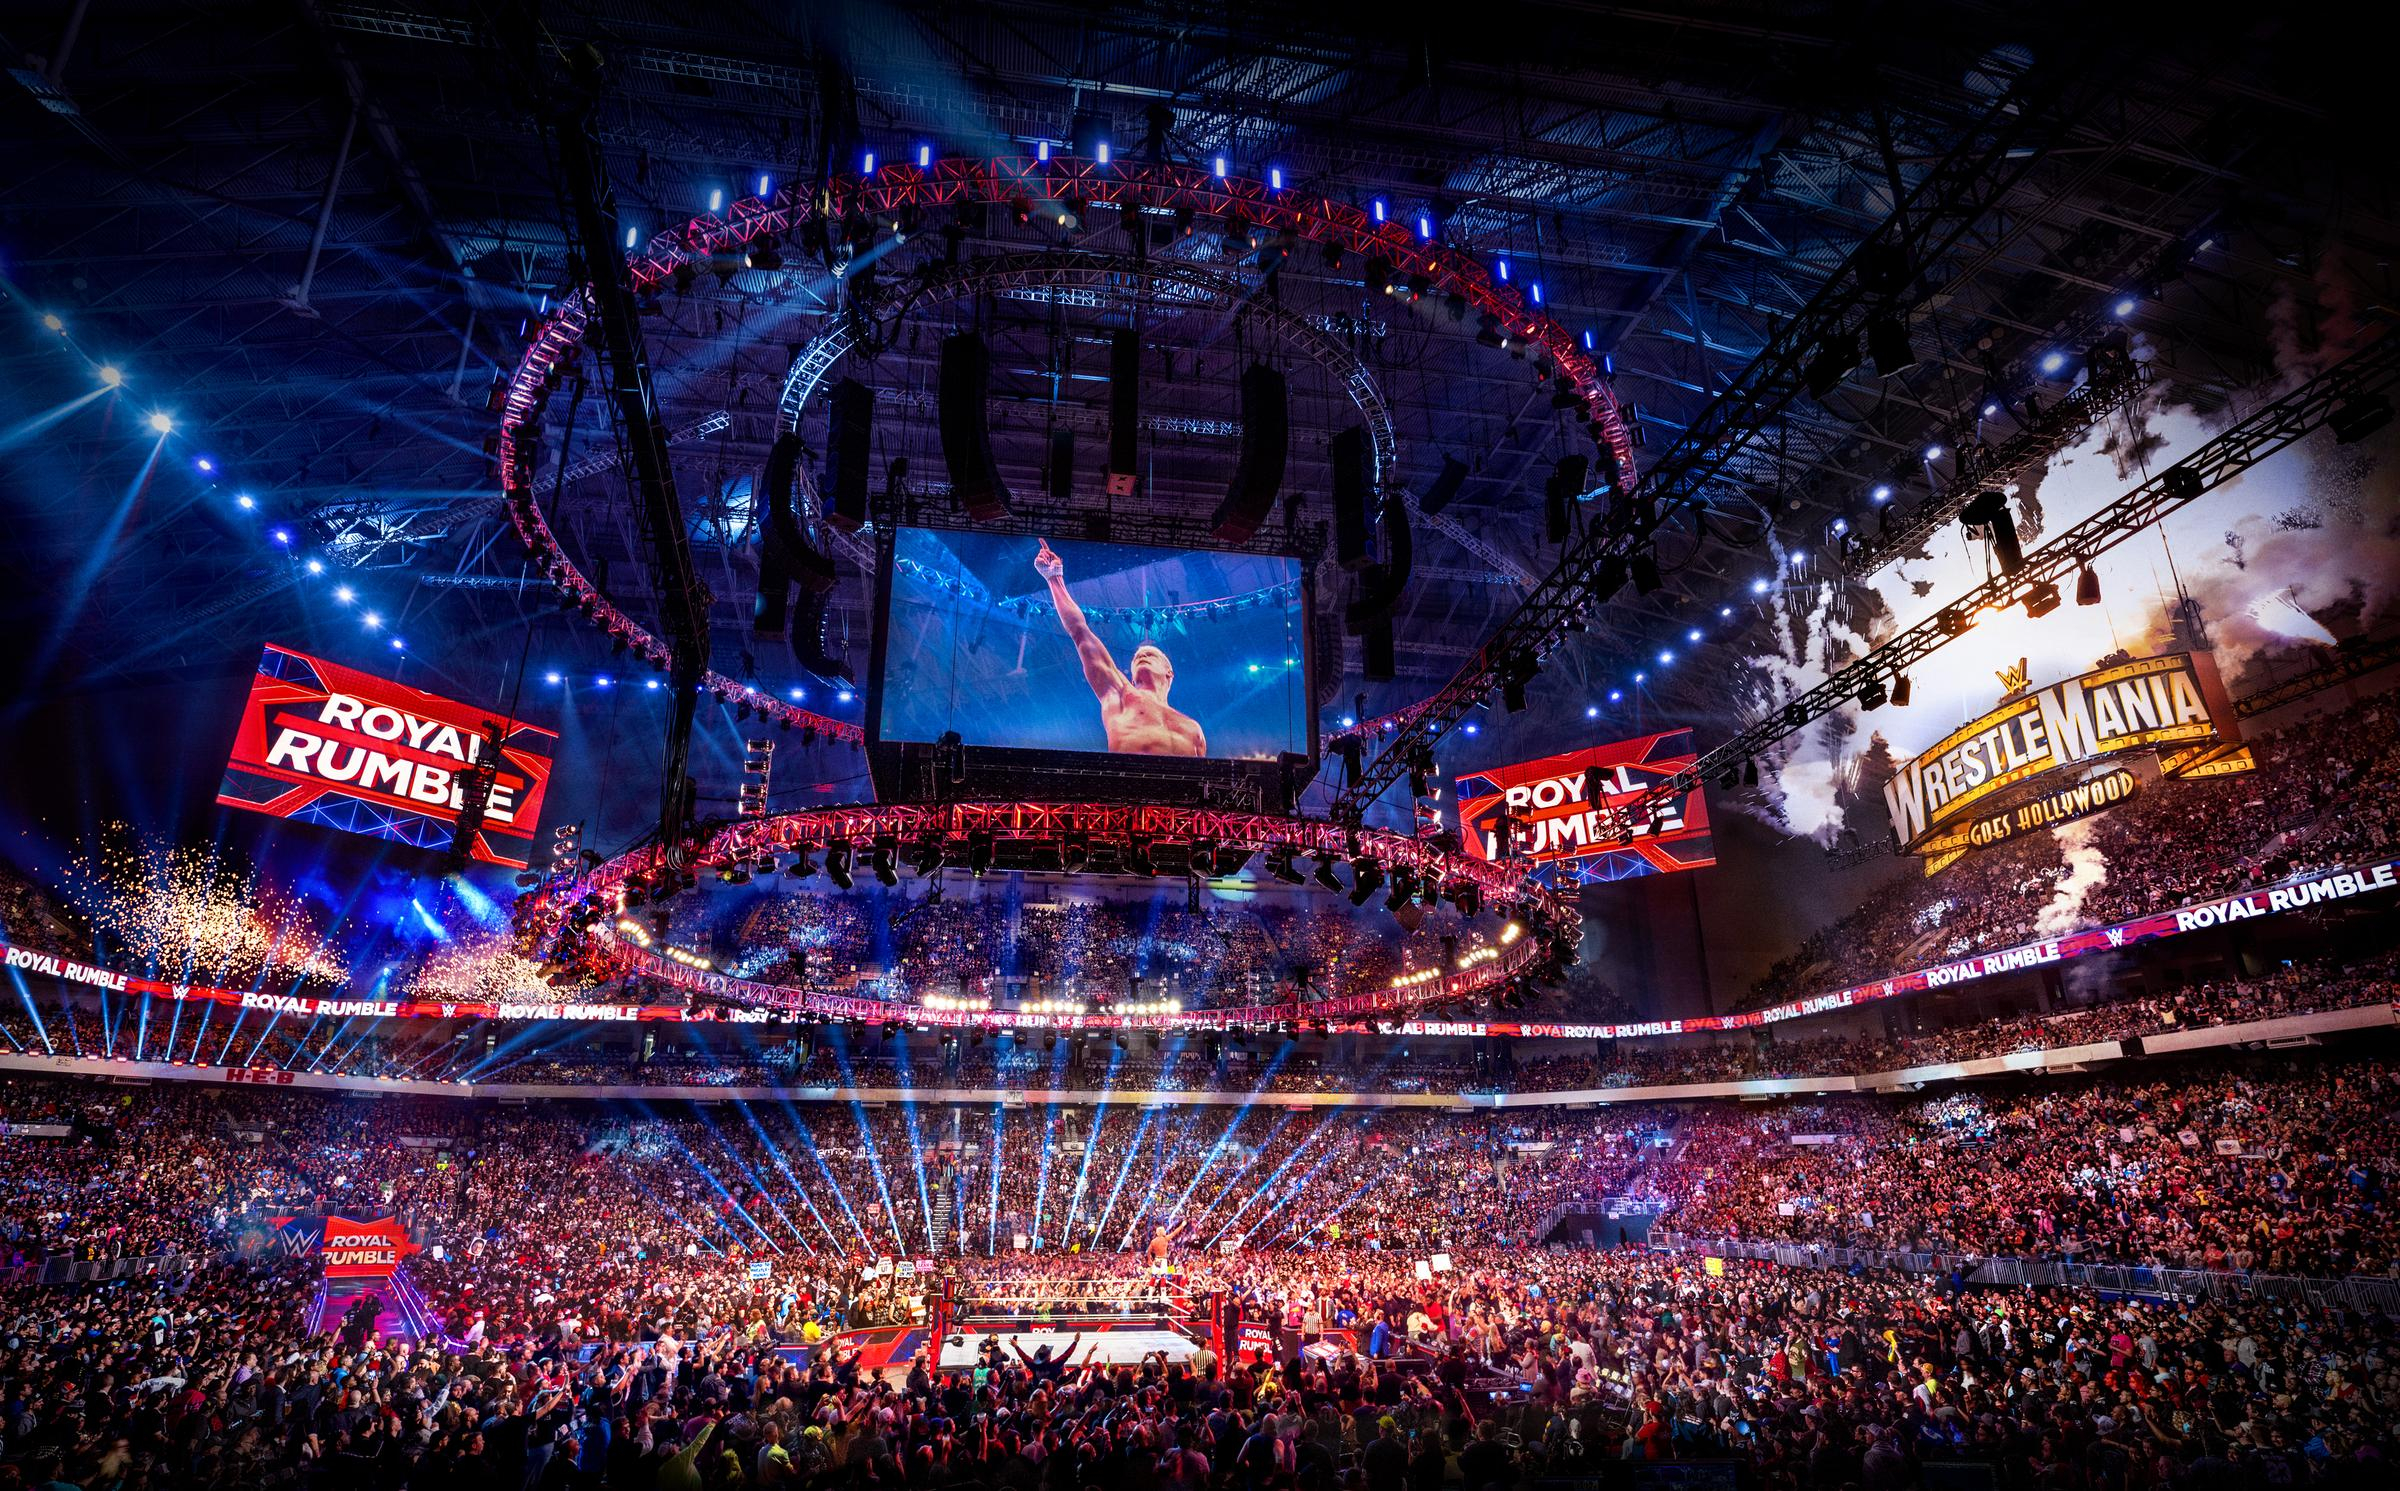 Tickets are up for grabs for the largest WWE Royal Rumble event to date